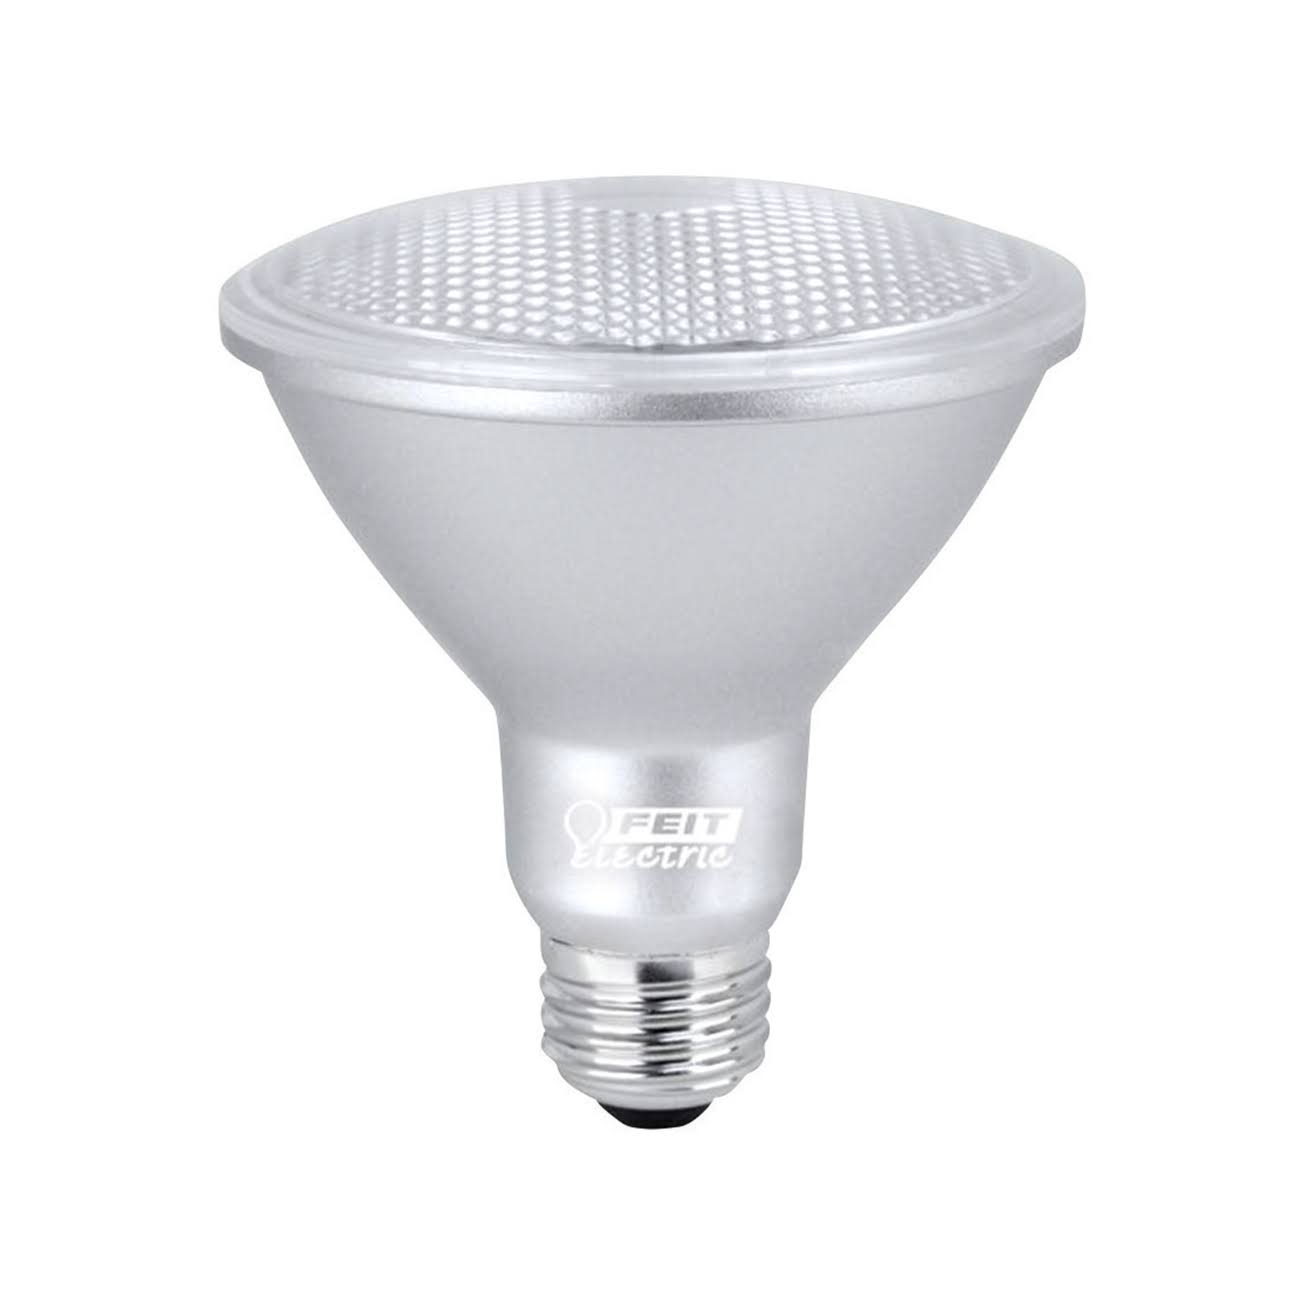 Feit Electric Dimmable LED Light Bulb - 15W